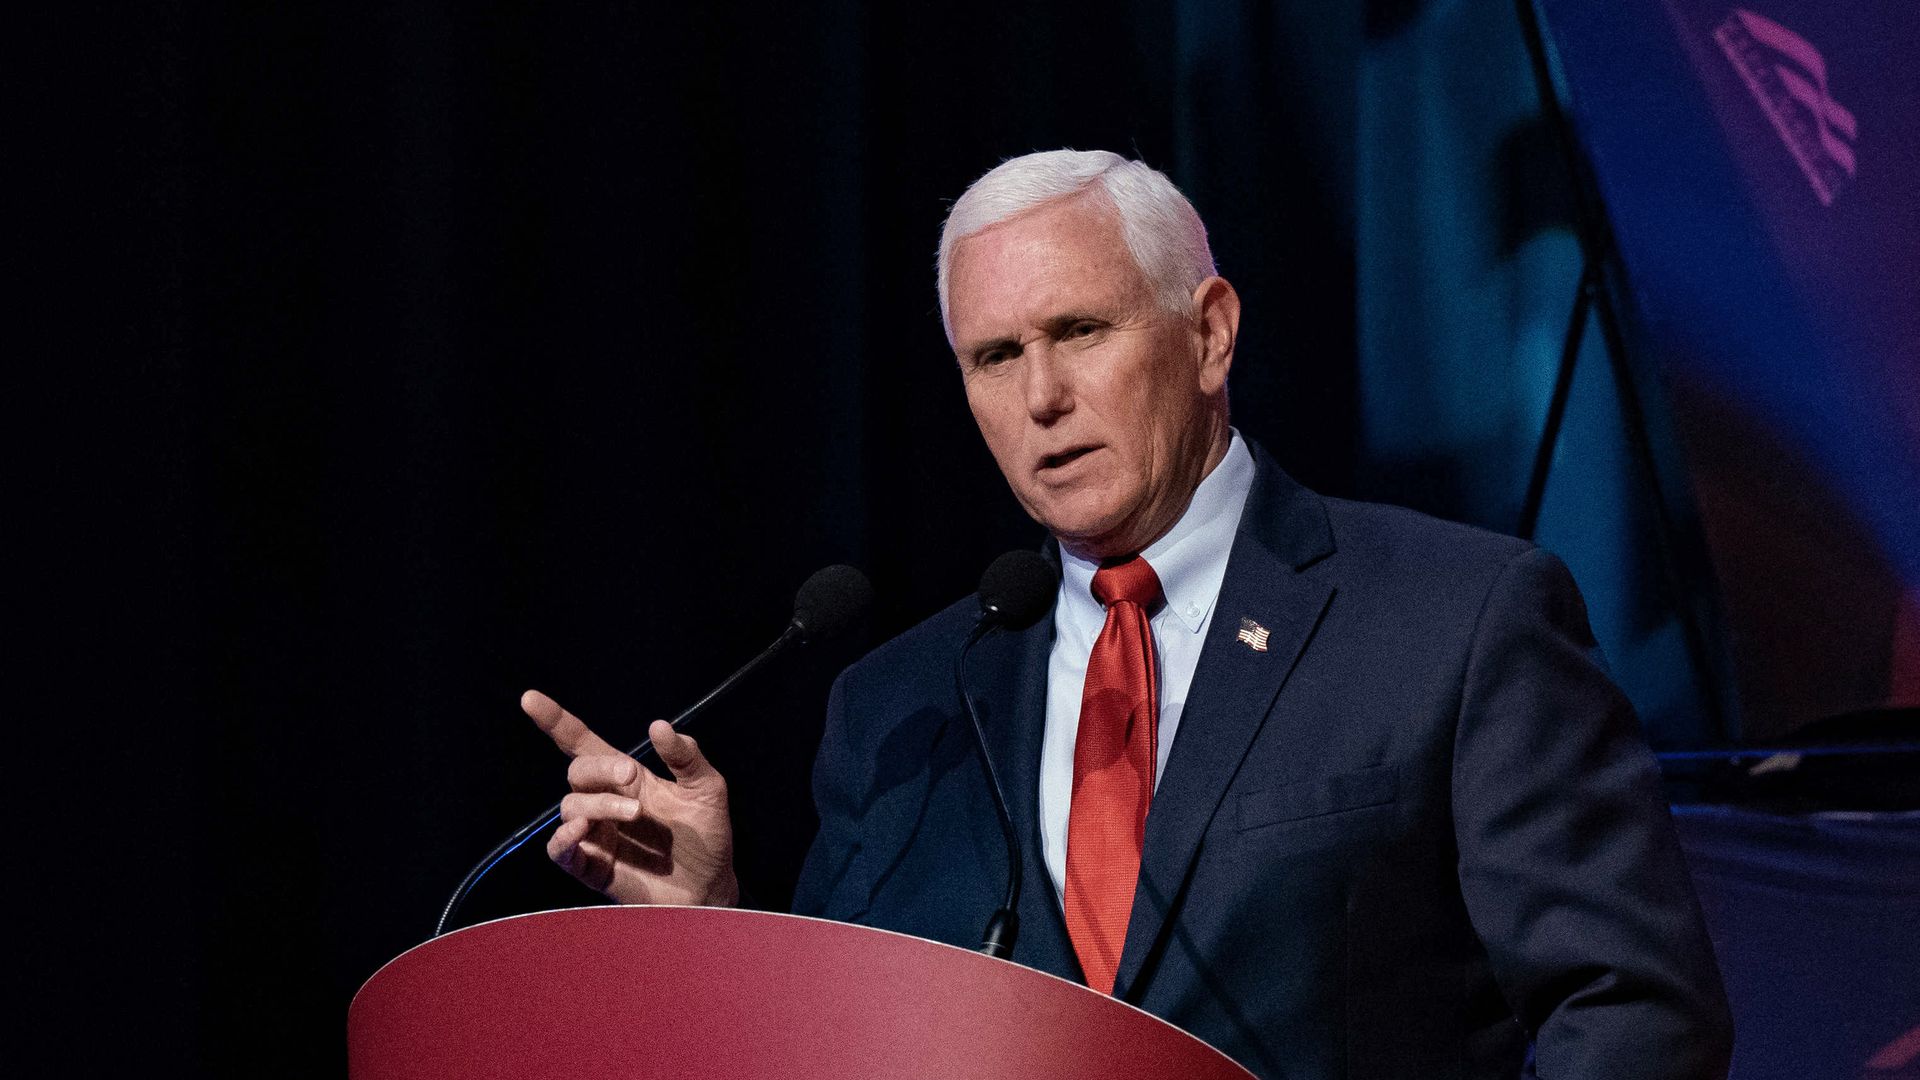  Former US Vice President Mike Pence speaking at the University of North Carolina Chapel Hill in Chapel Hill, North Carolina, on April 26.